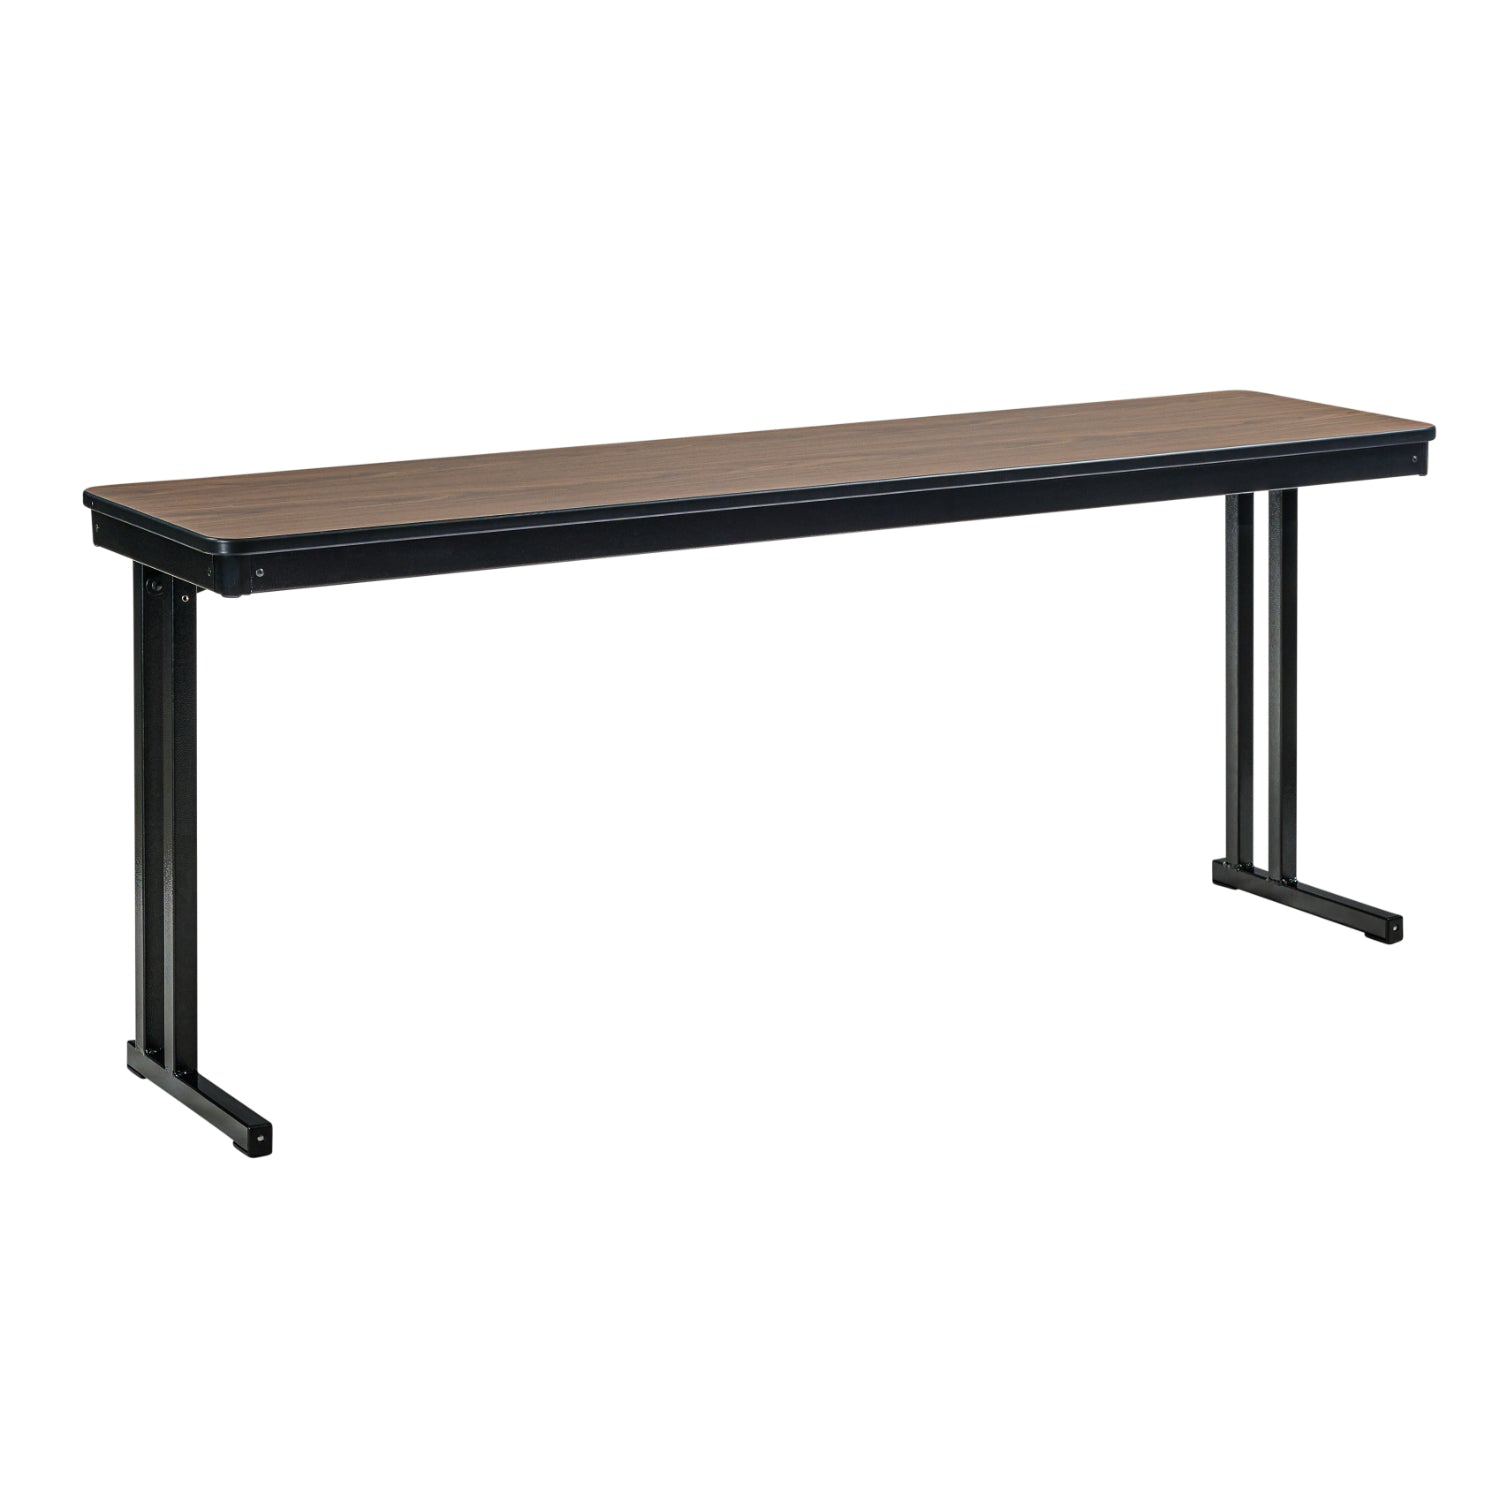 Max Seating Folding Training and Seminar Table with Cantilever Legs, 24" x 48", High Pressure Laminate Top with Particleboard Core/T-Mold Edge